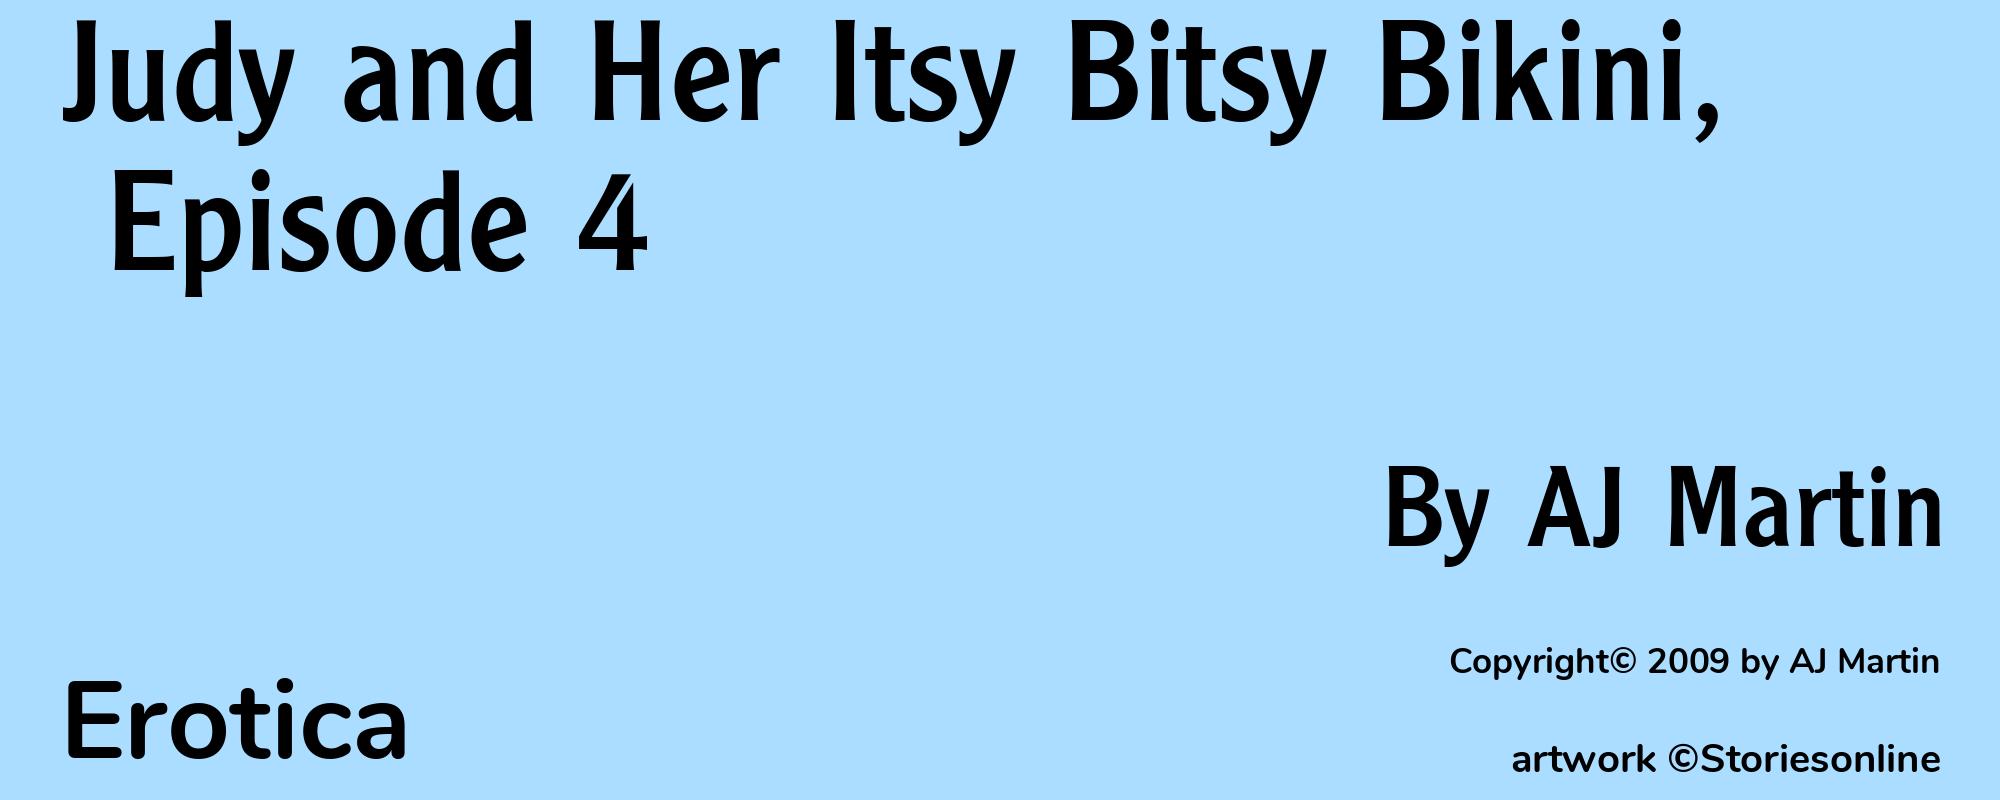 Judy and Her Itsy Bitsy Bikini, Episode 4 - Cover